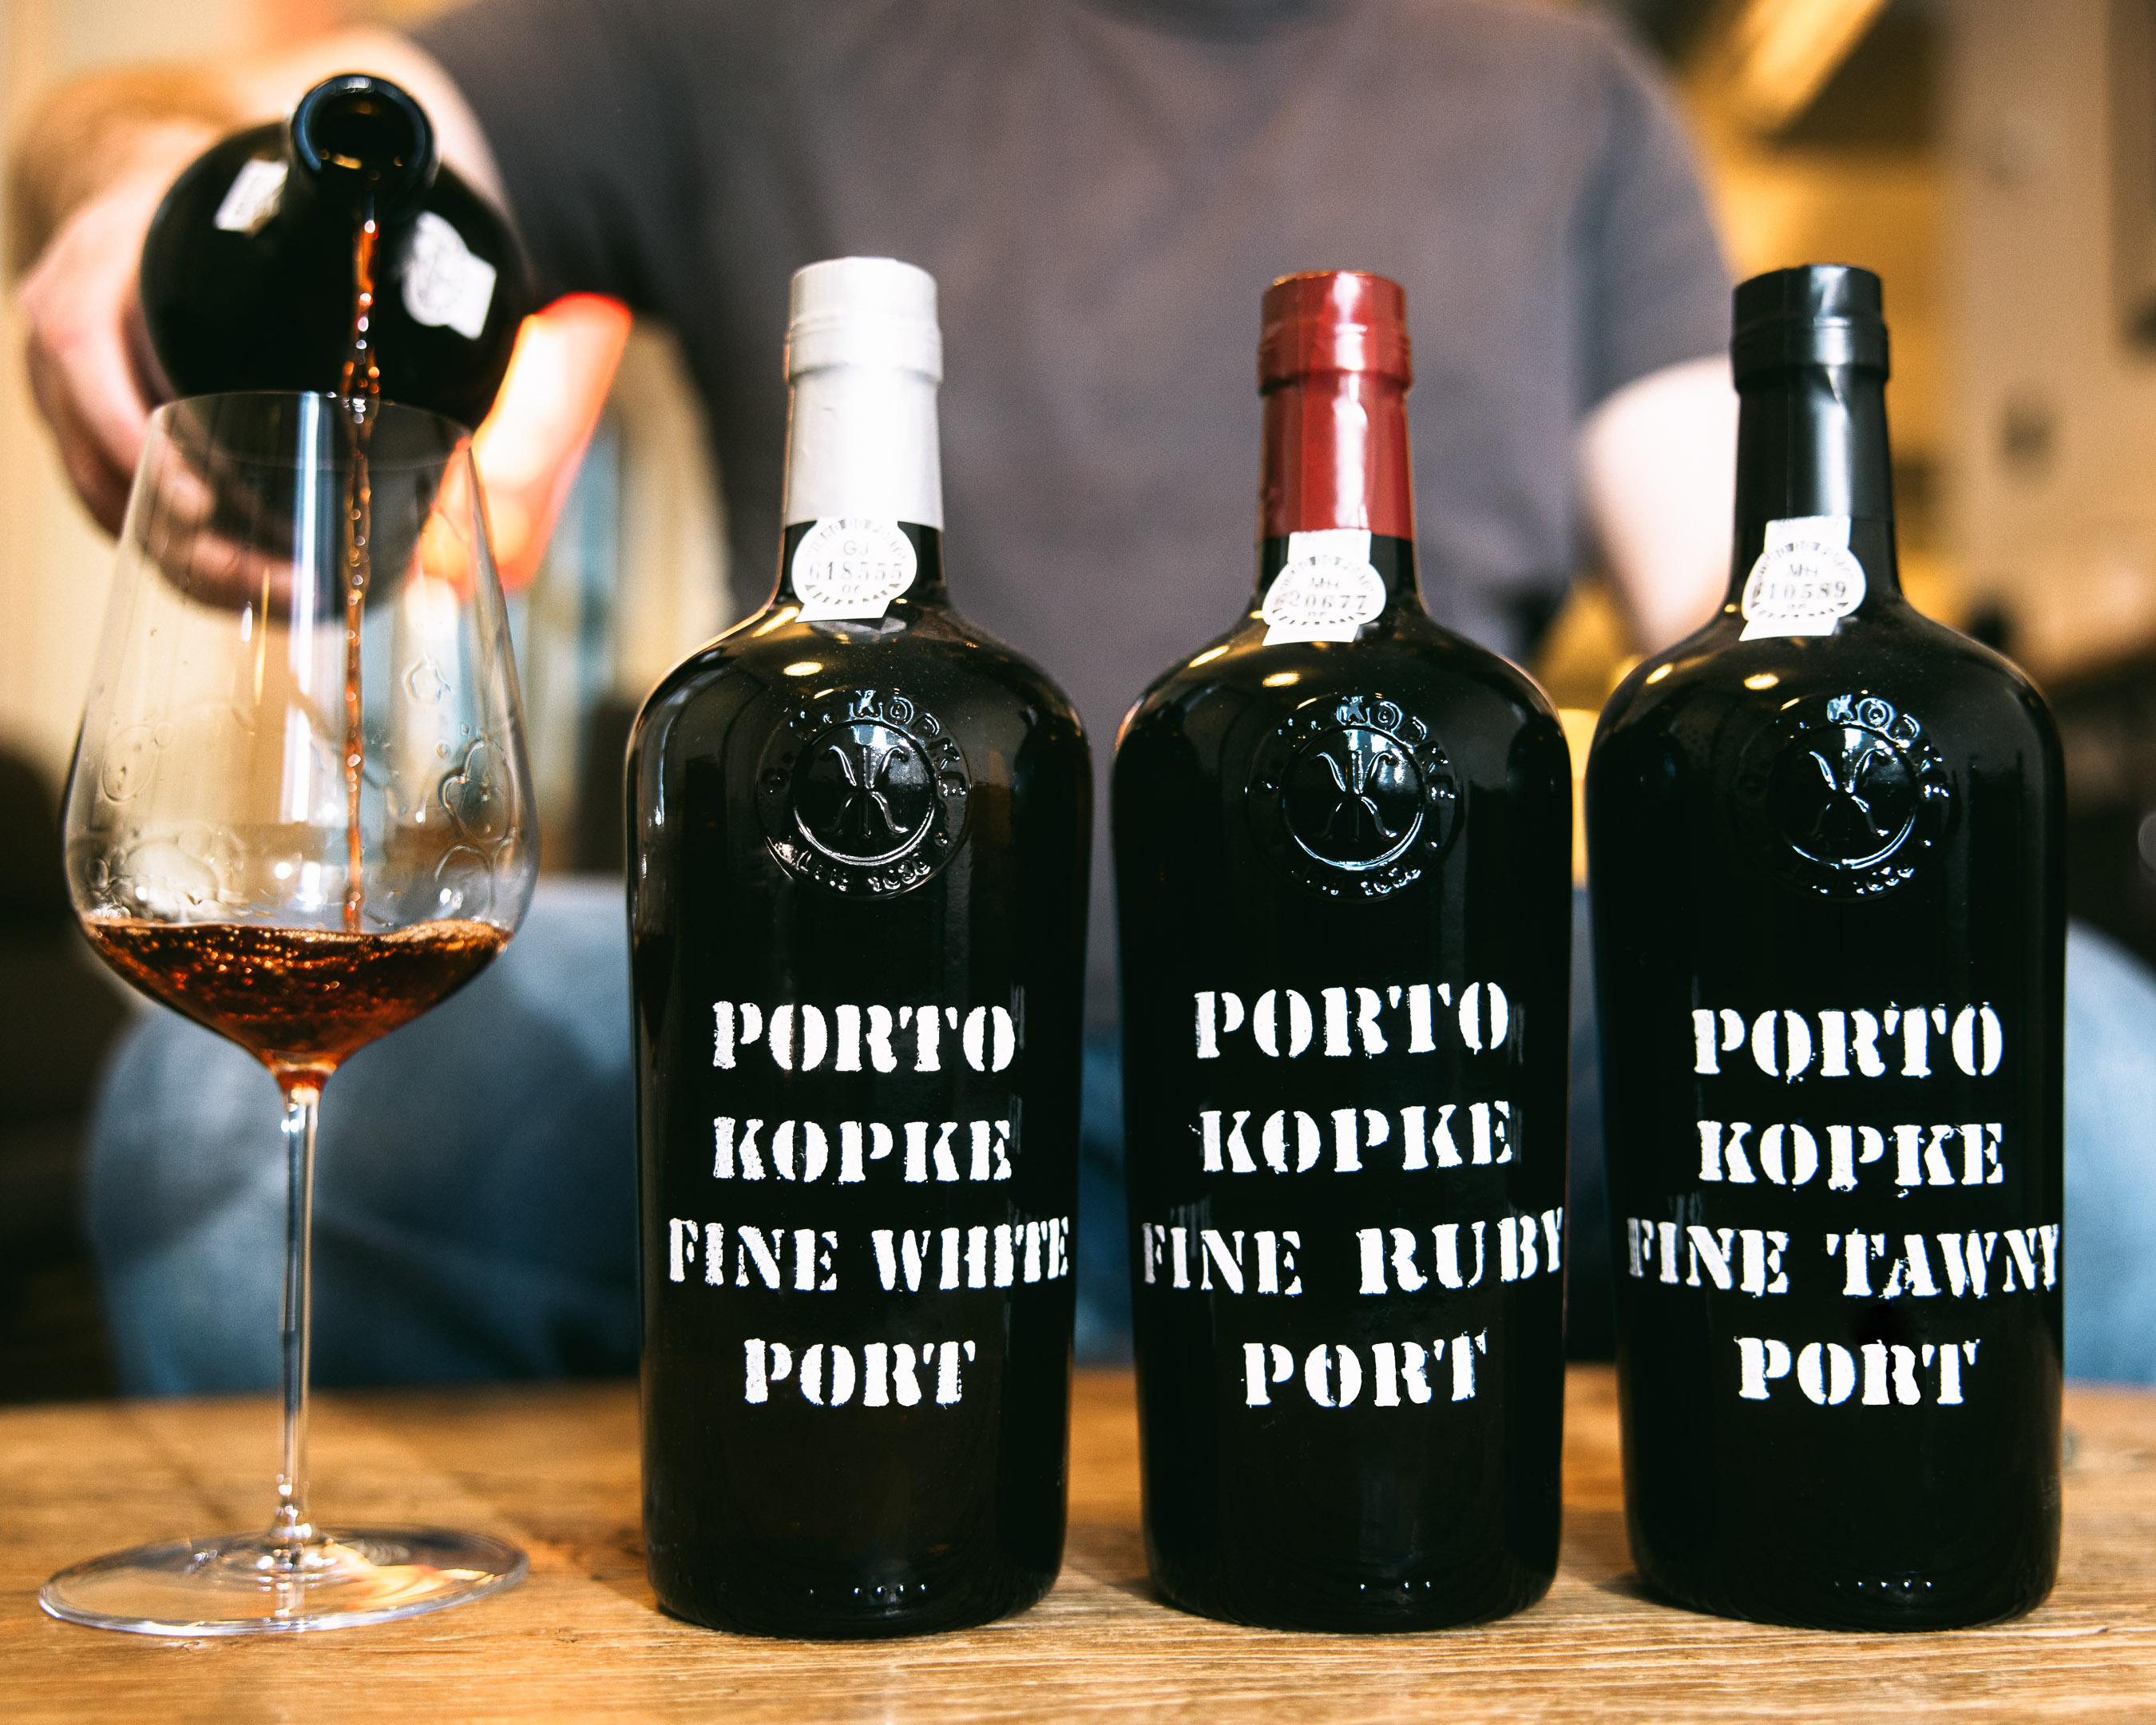 Introducing Kopke: The Oldest Port House in the World 3